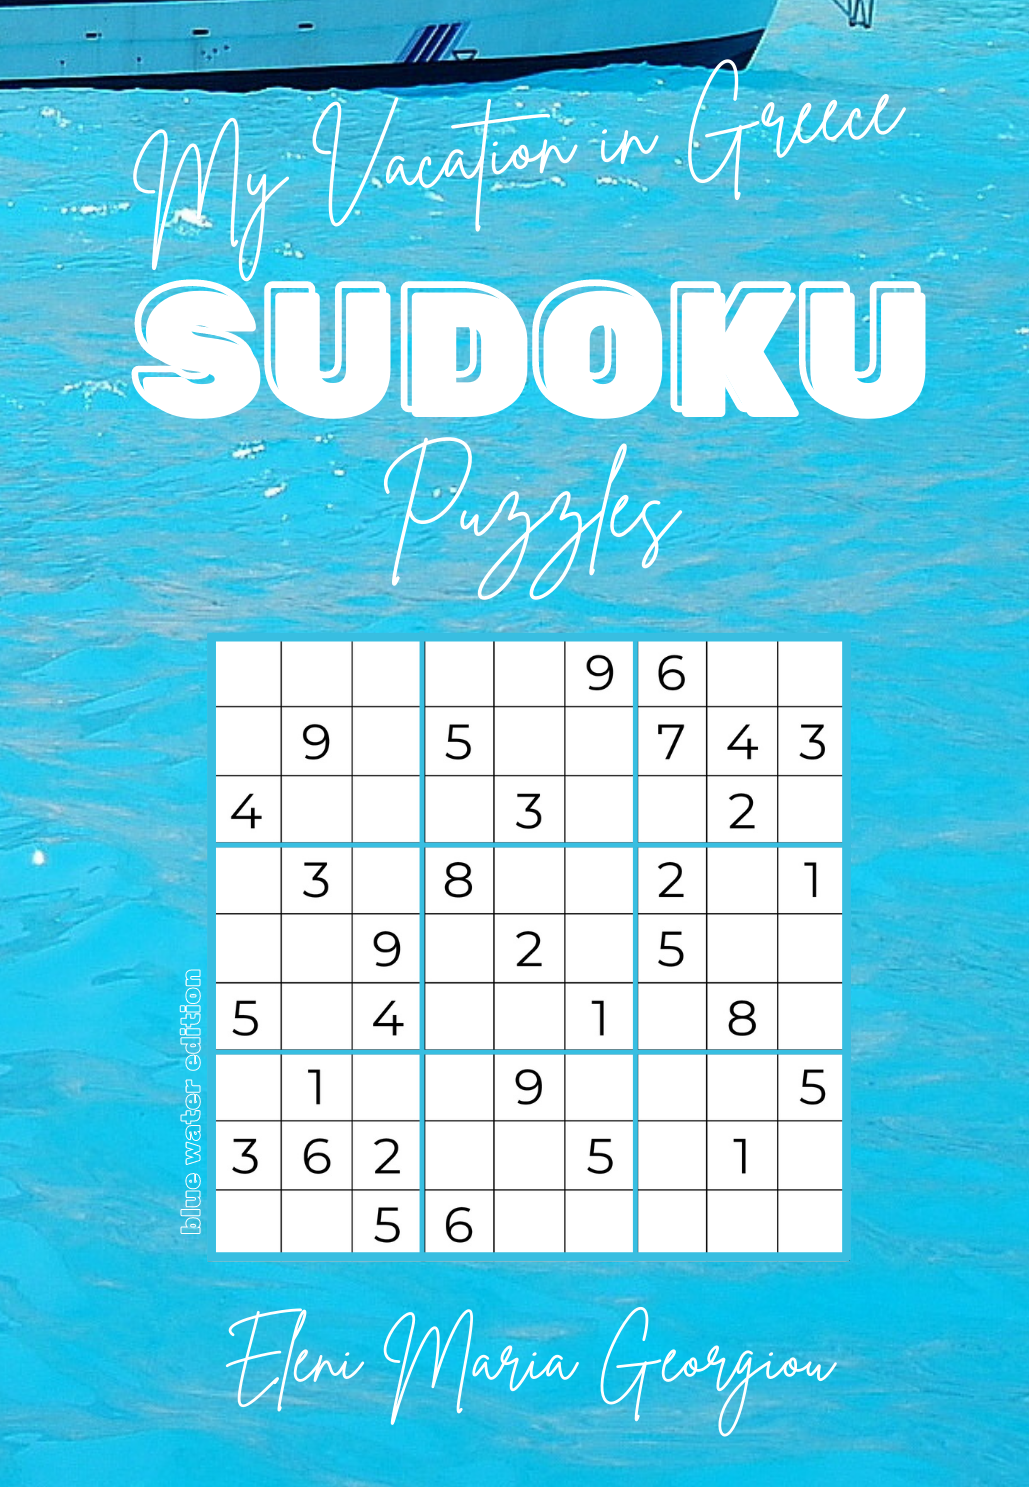 My Vacation in Greece SUDOKU Puzzles: Blue Water Edition